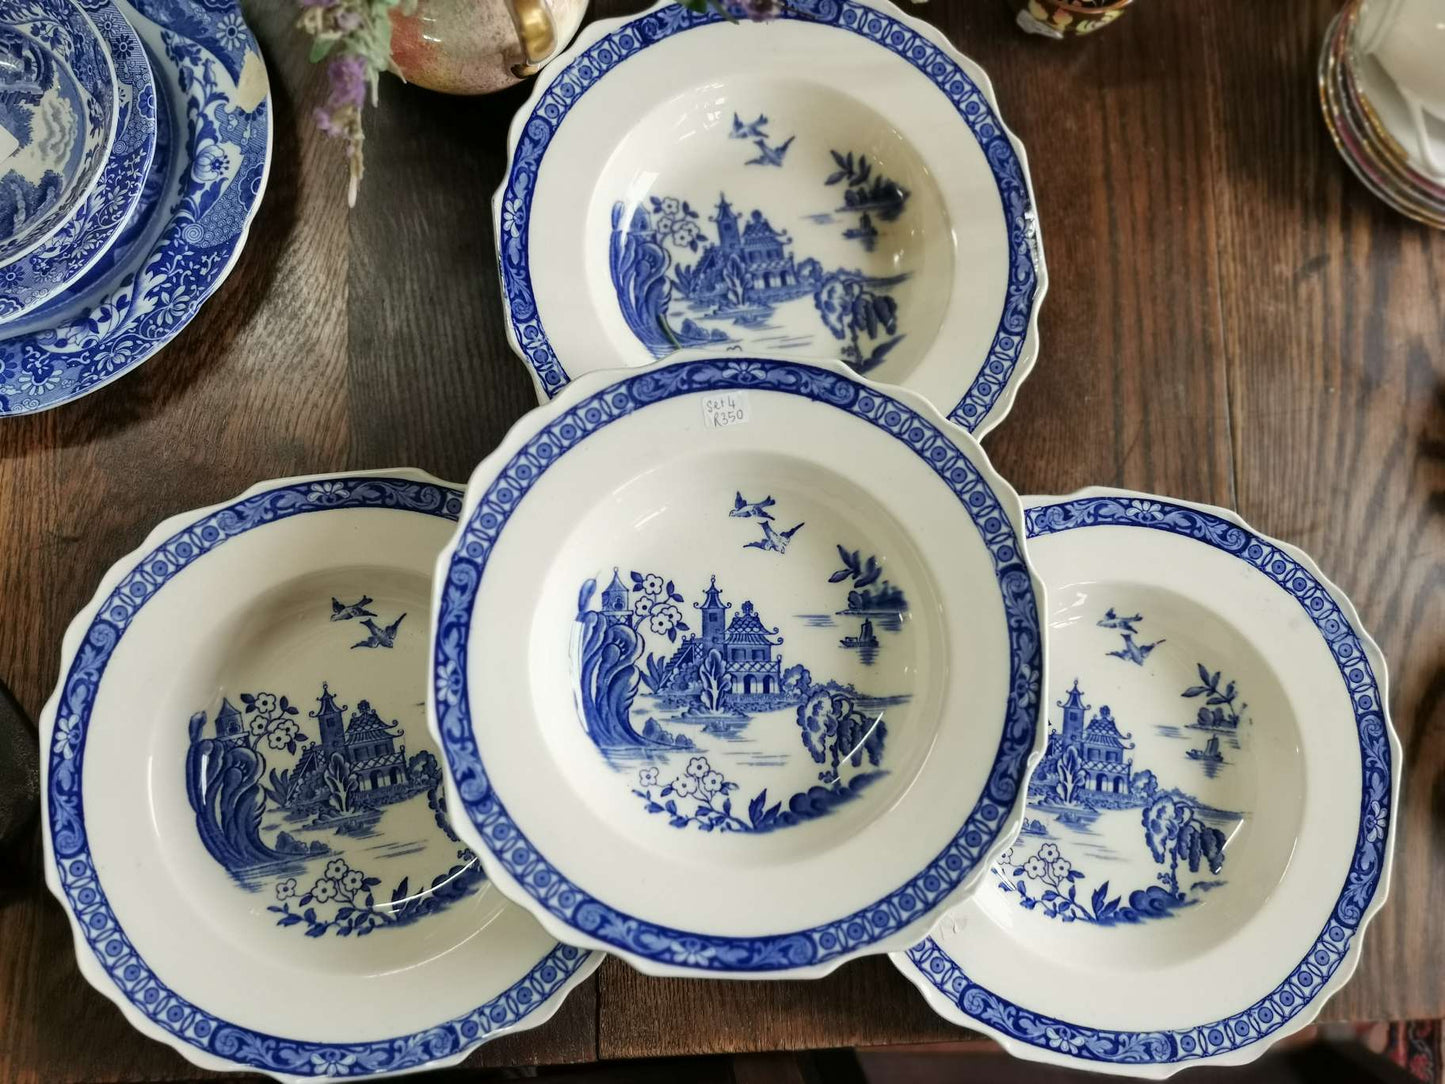 Set of 4 Blue and White plates